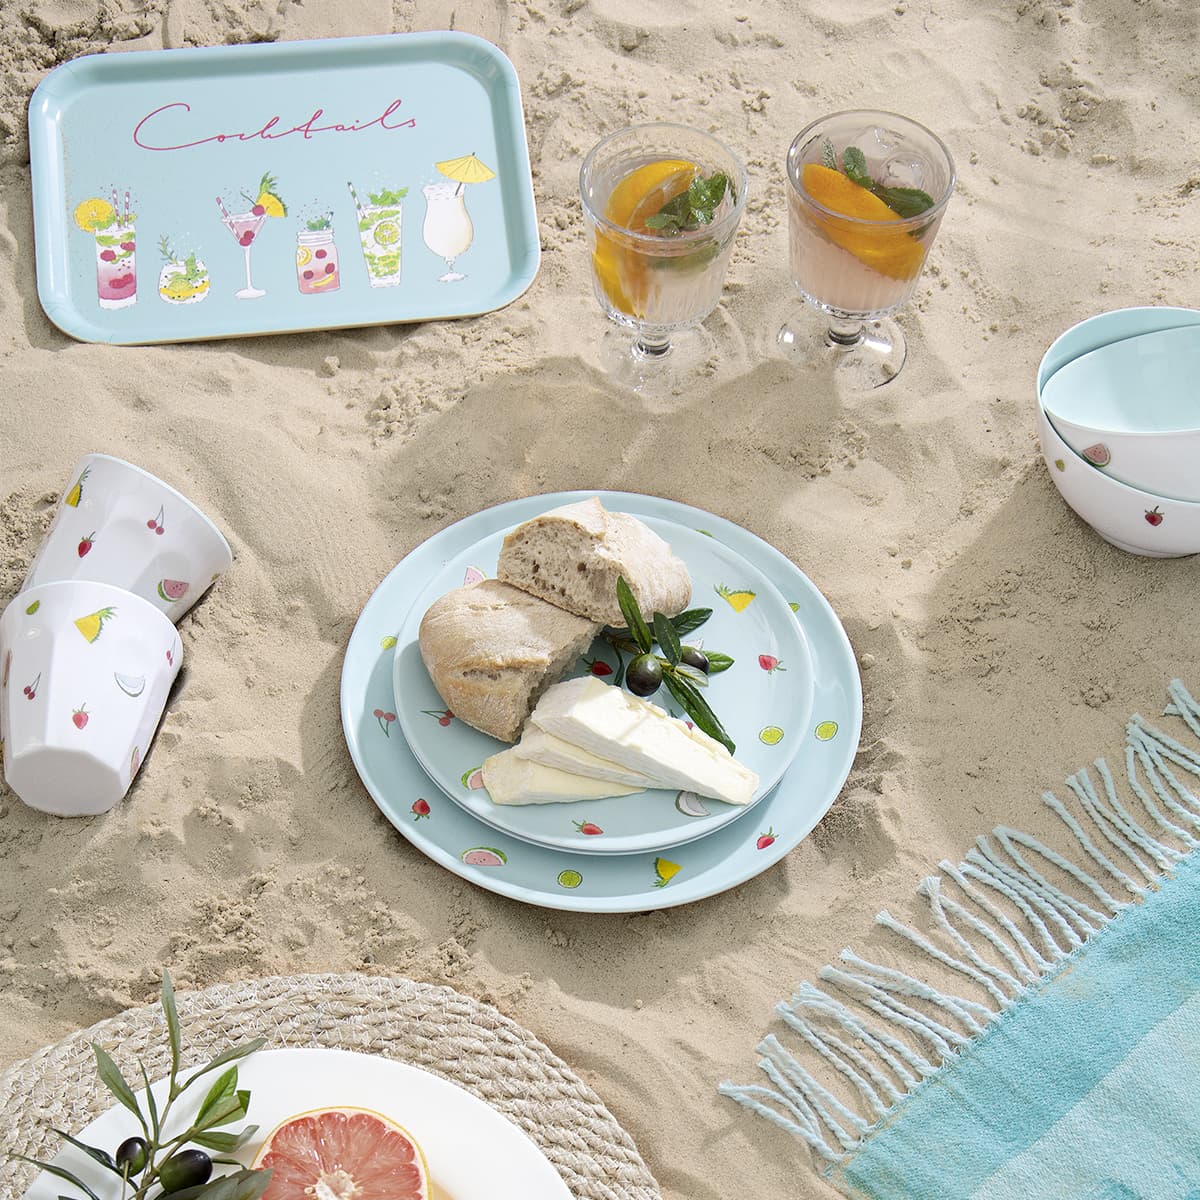 https://cdn.shopify.com/s/files/1/0201/1771/7092/products/cocktails-beach-picnic-flat-lay-3-lifestyle-high-res-square_3040b0c5-228d-46e2-8a49-542cef548815.jpg?v=1686823092